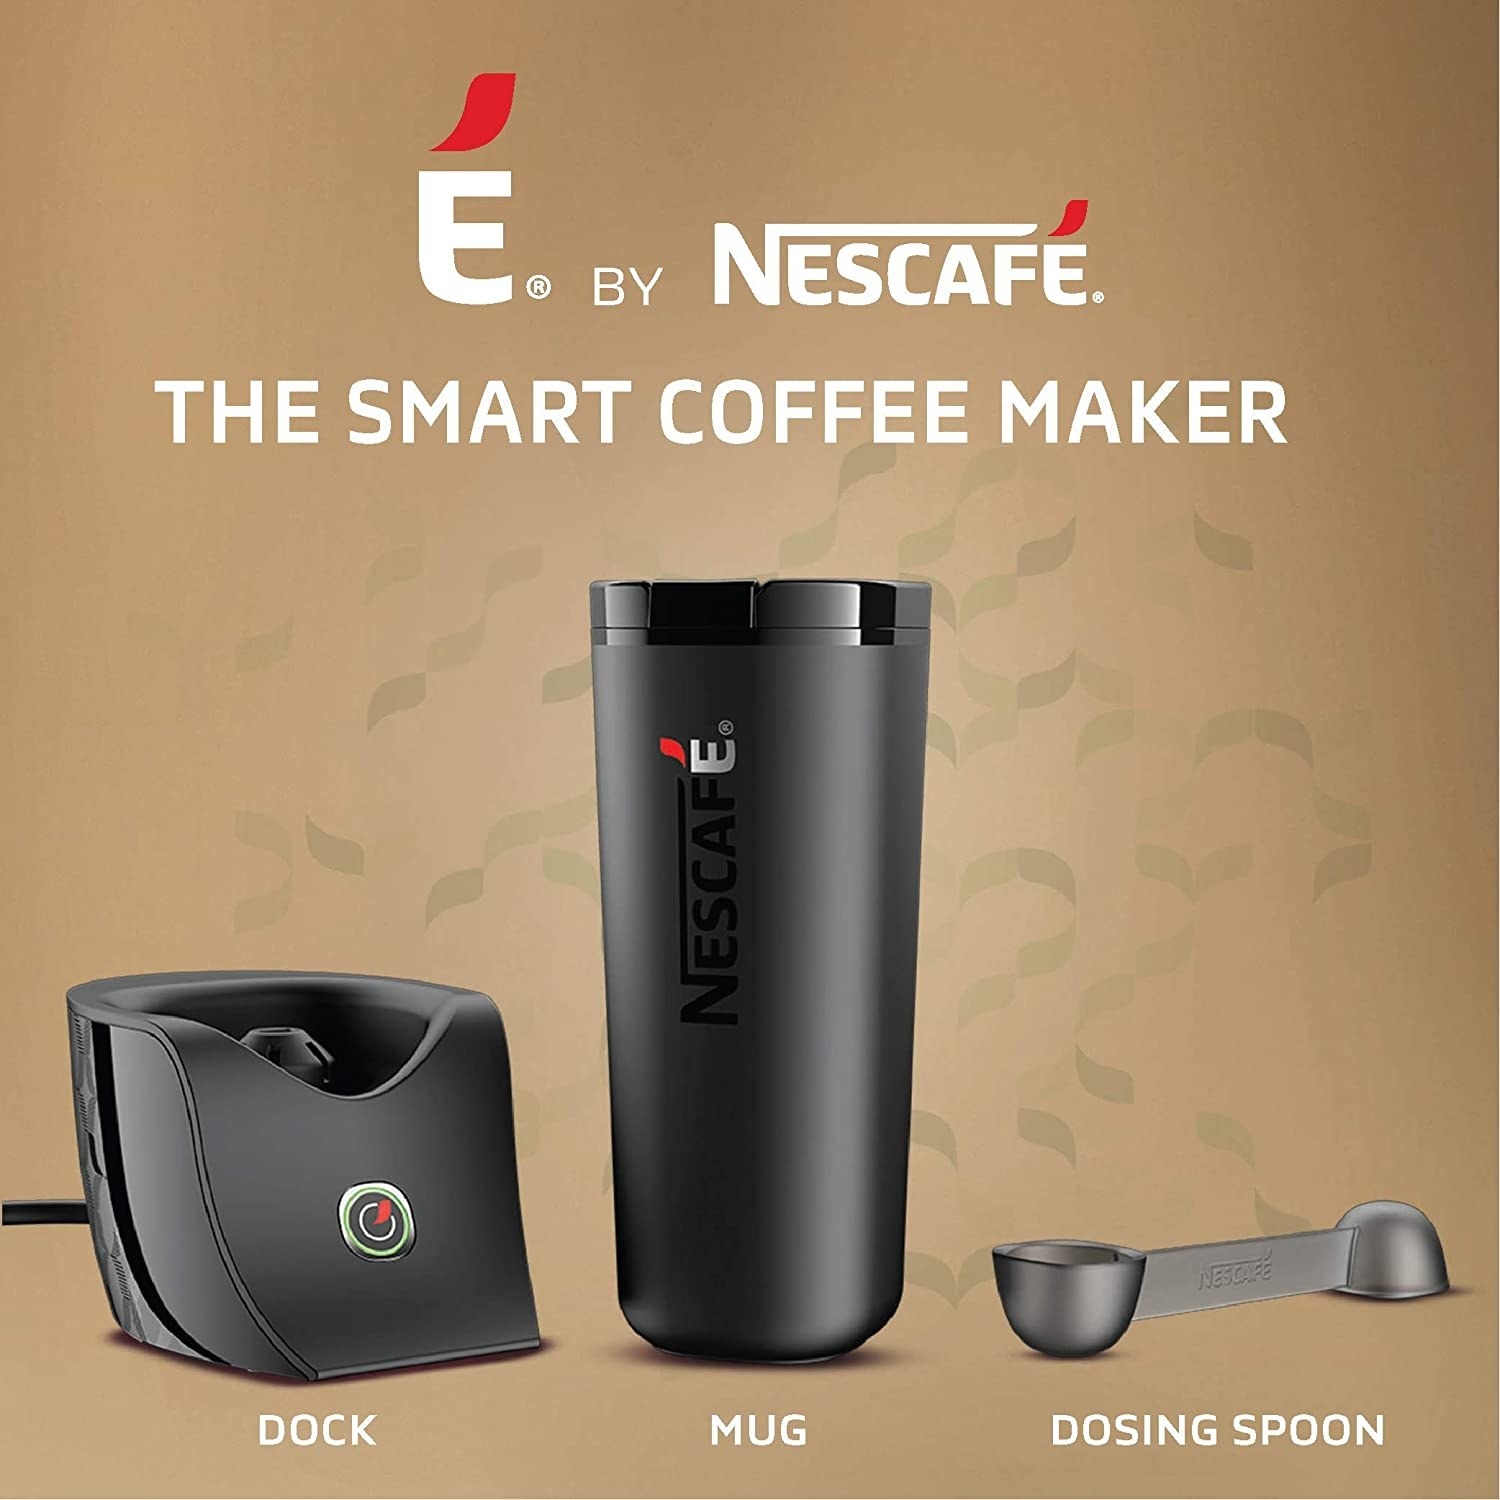 The smart coffee maker includes a mug, dock, and a dosing spoon.